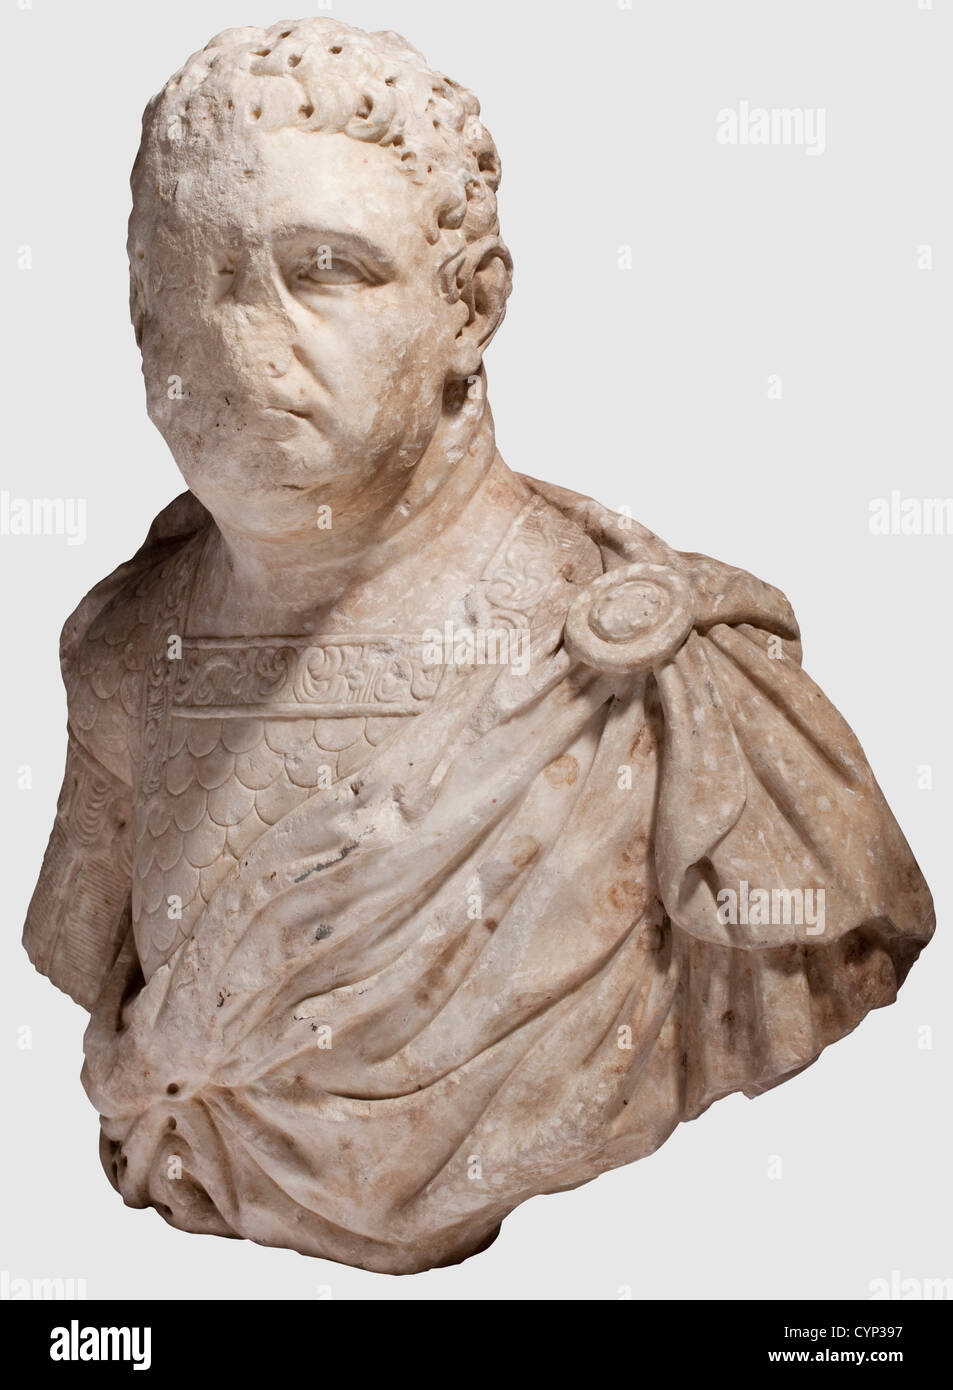 A large marble bust of Aulus Vitellius,of Roman style,baroque period.Portrayed in the typical left facing posture of the head,with scale armour and thrown over cloak.The right side of the face destroyed.Height 78 cm,width 78 cm.Aulus Vitellius was crowned Roman Emperor in April 69 A.D,the so called Year of the Four Emperors,on the 20th of December of that year he was already publicly displayed on the Gemonian stairs by Marcus Antonius Primus,who had him tortured to death,dragged through Rome on a hook and thrown into the Tiber.The biographer Sueton,Additional-Rights-Clearences-Not Available Stock Photo